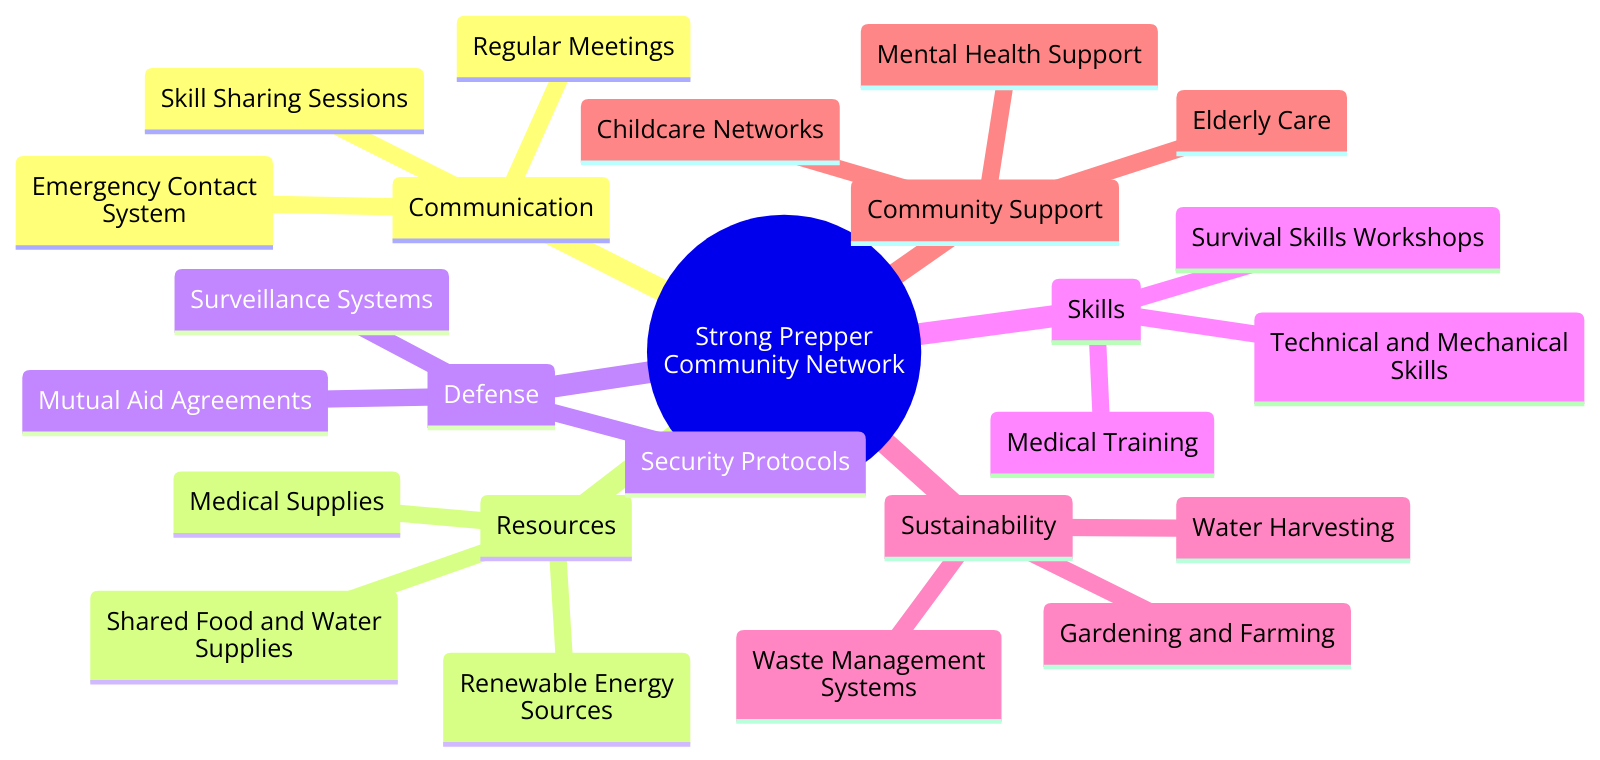  the components of a strong prepper community network